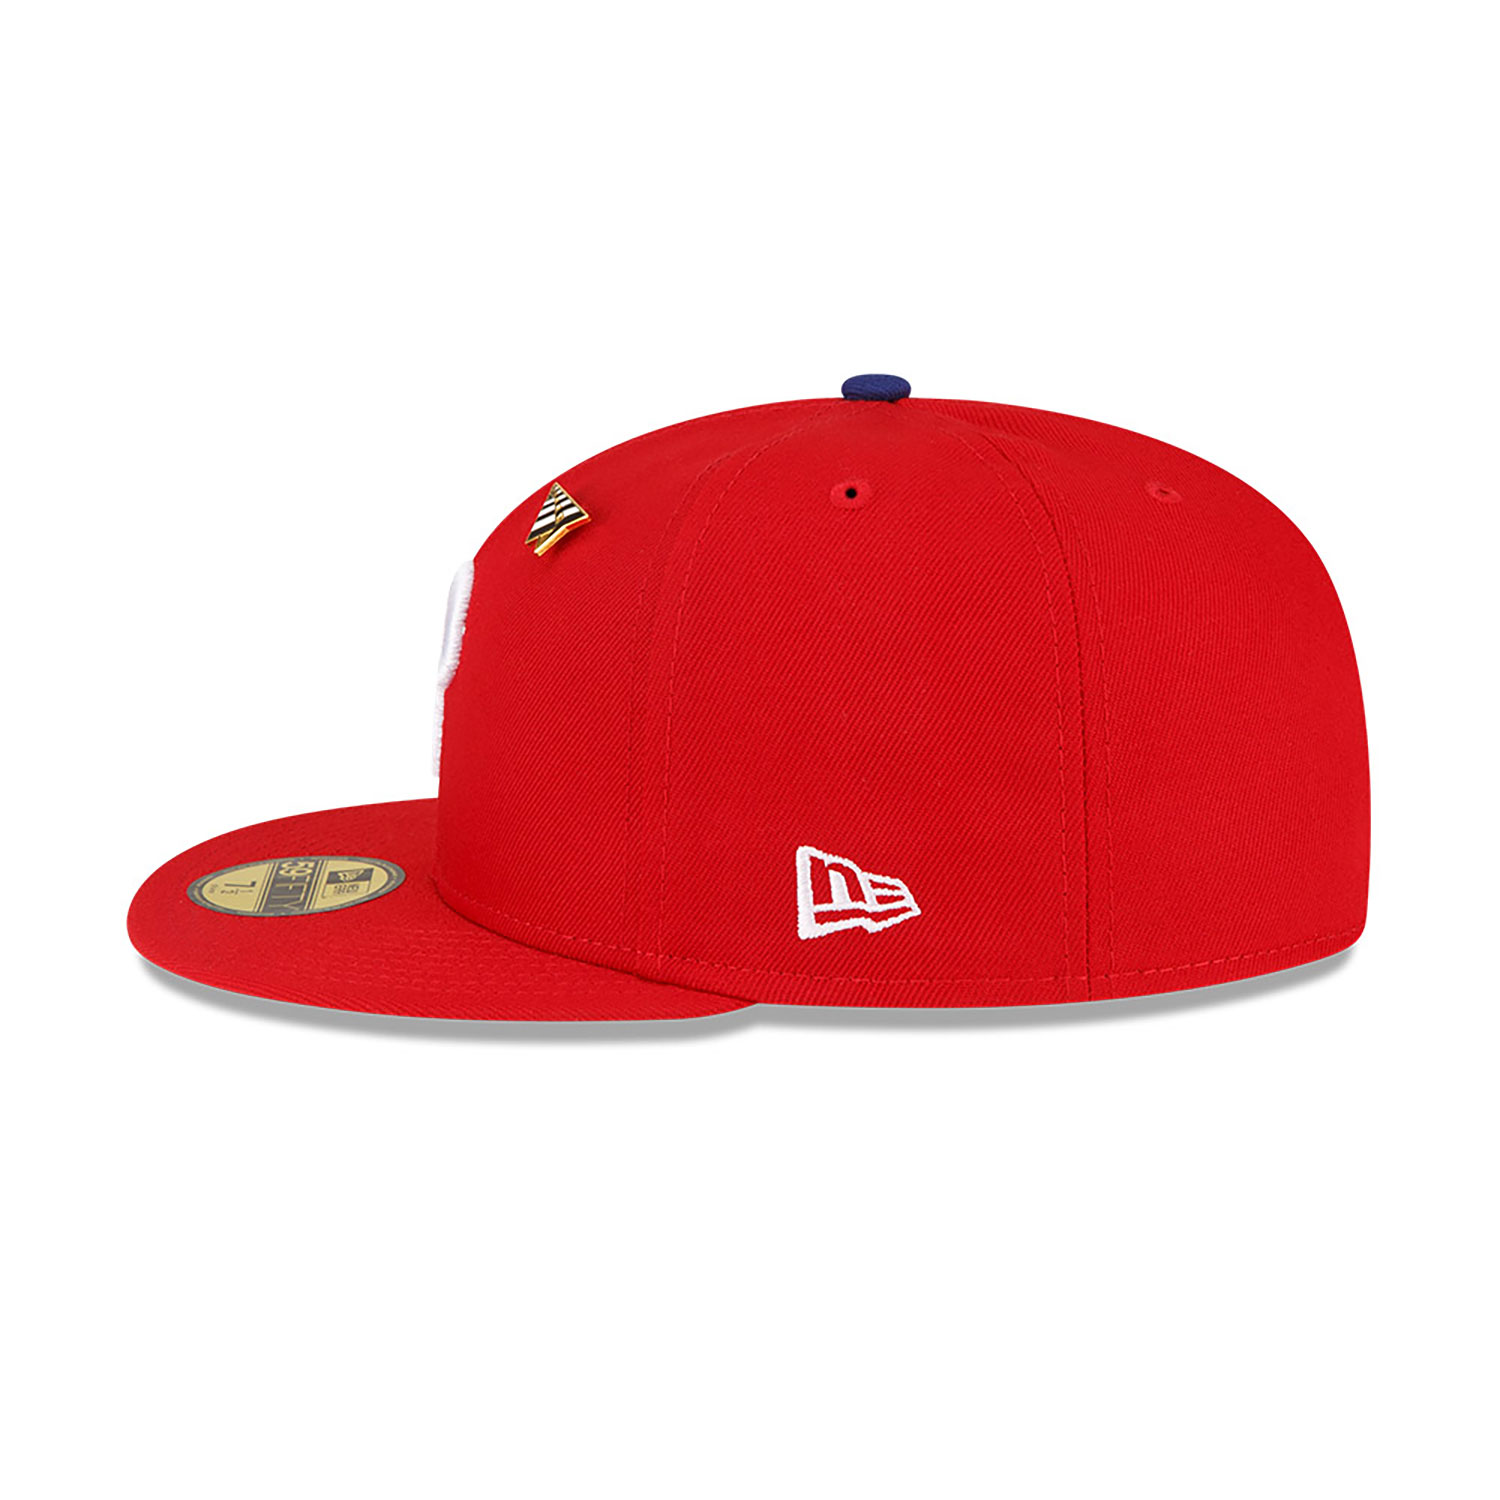 Philadelphia Phillies Paper Planes x MLB Red 59FIFTY Fitted Cap